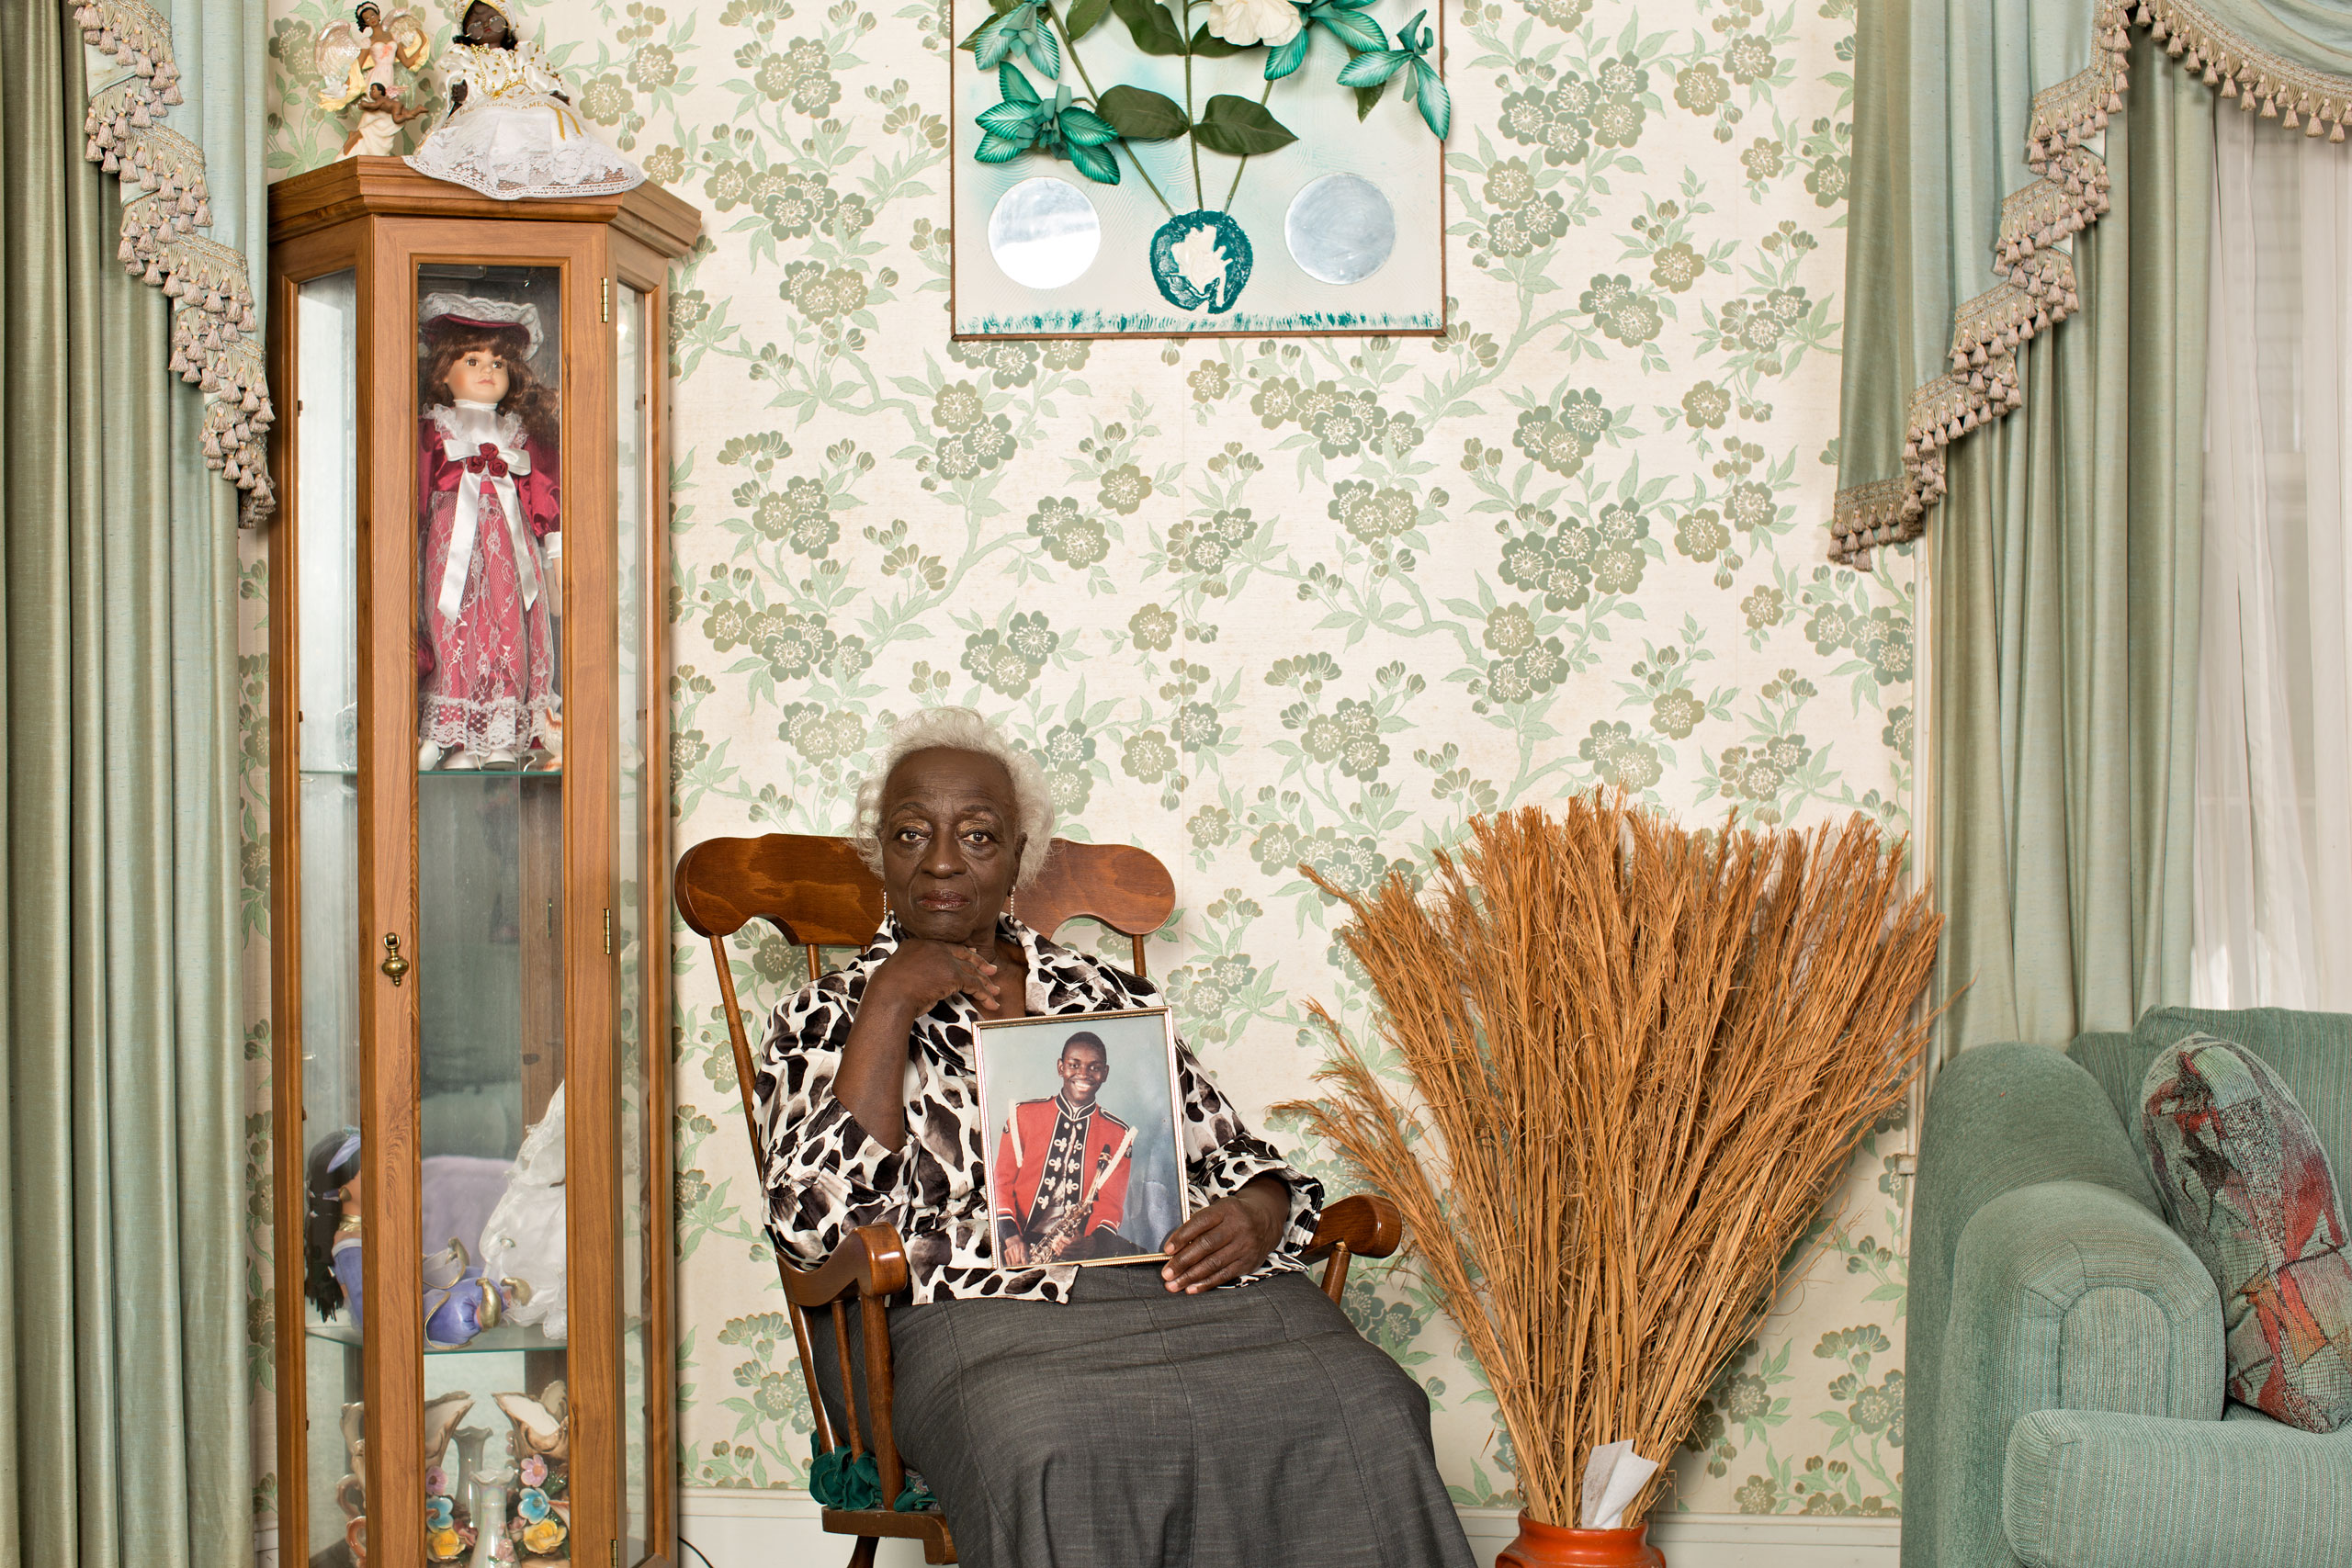 Gracie BroomeThe Rev. Clementa Pinckney’s grandmother at her home in Mullins, S.C., with a photo of him in his school marching-band uniform. “When you hear others forgiving,” she says, “it makes you feel good.”